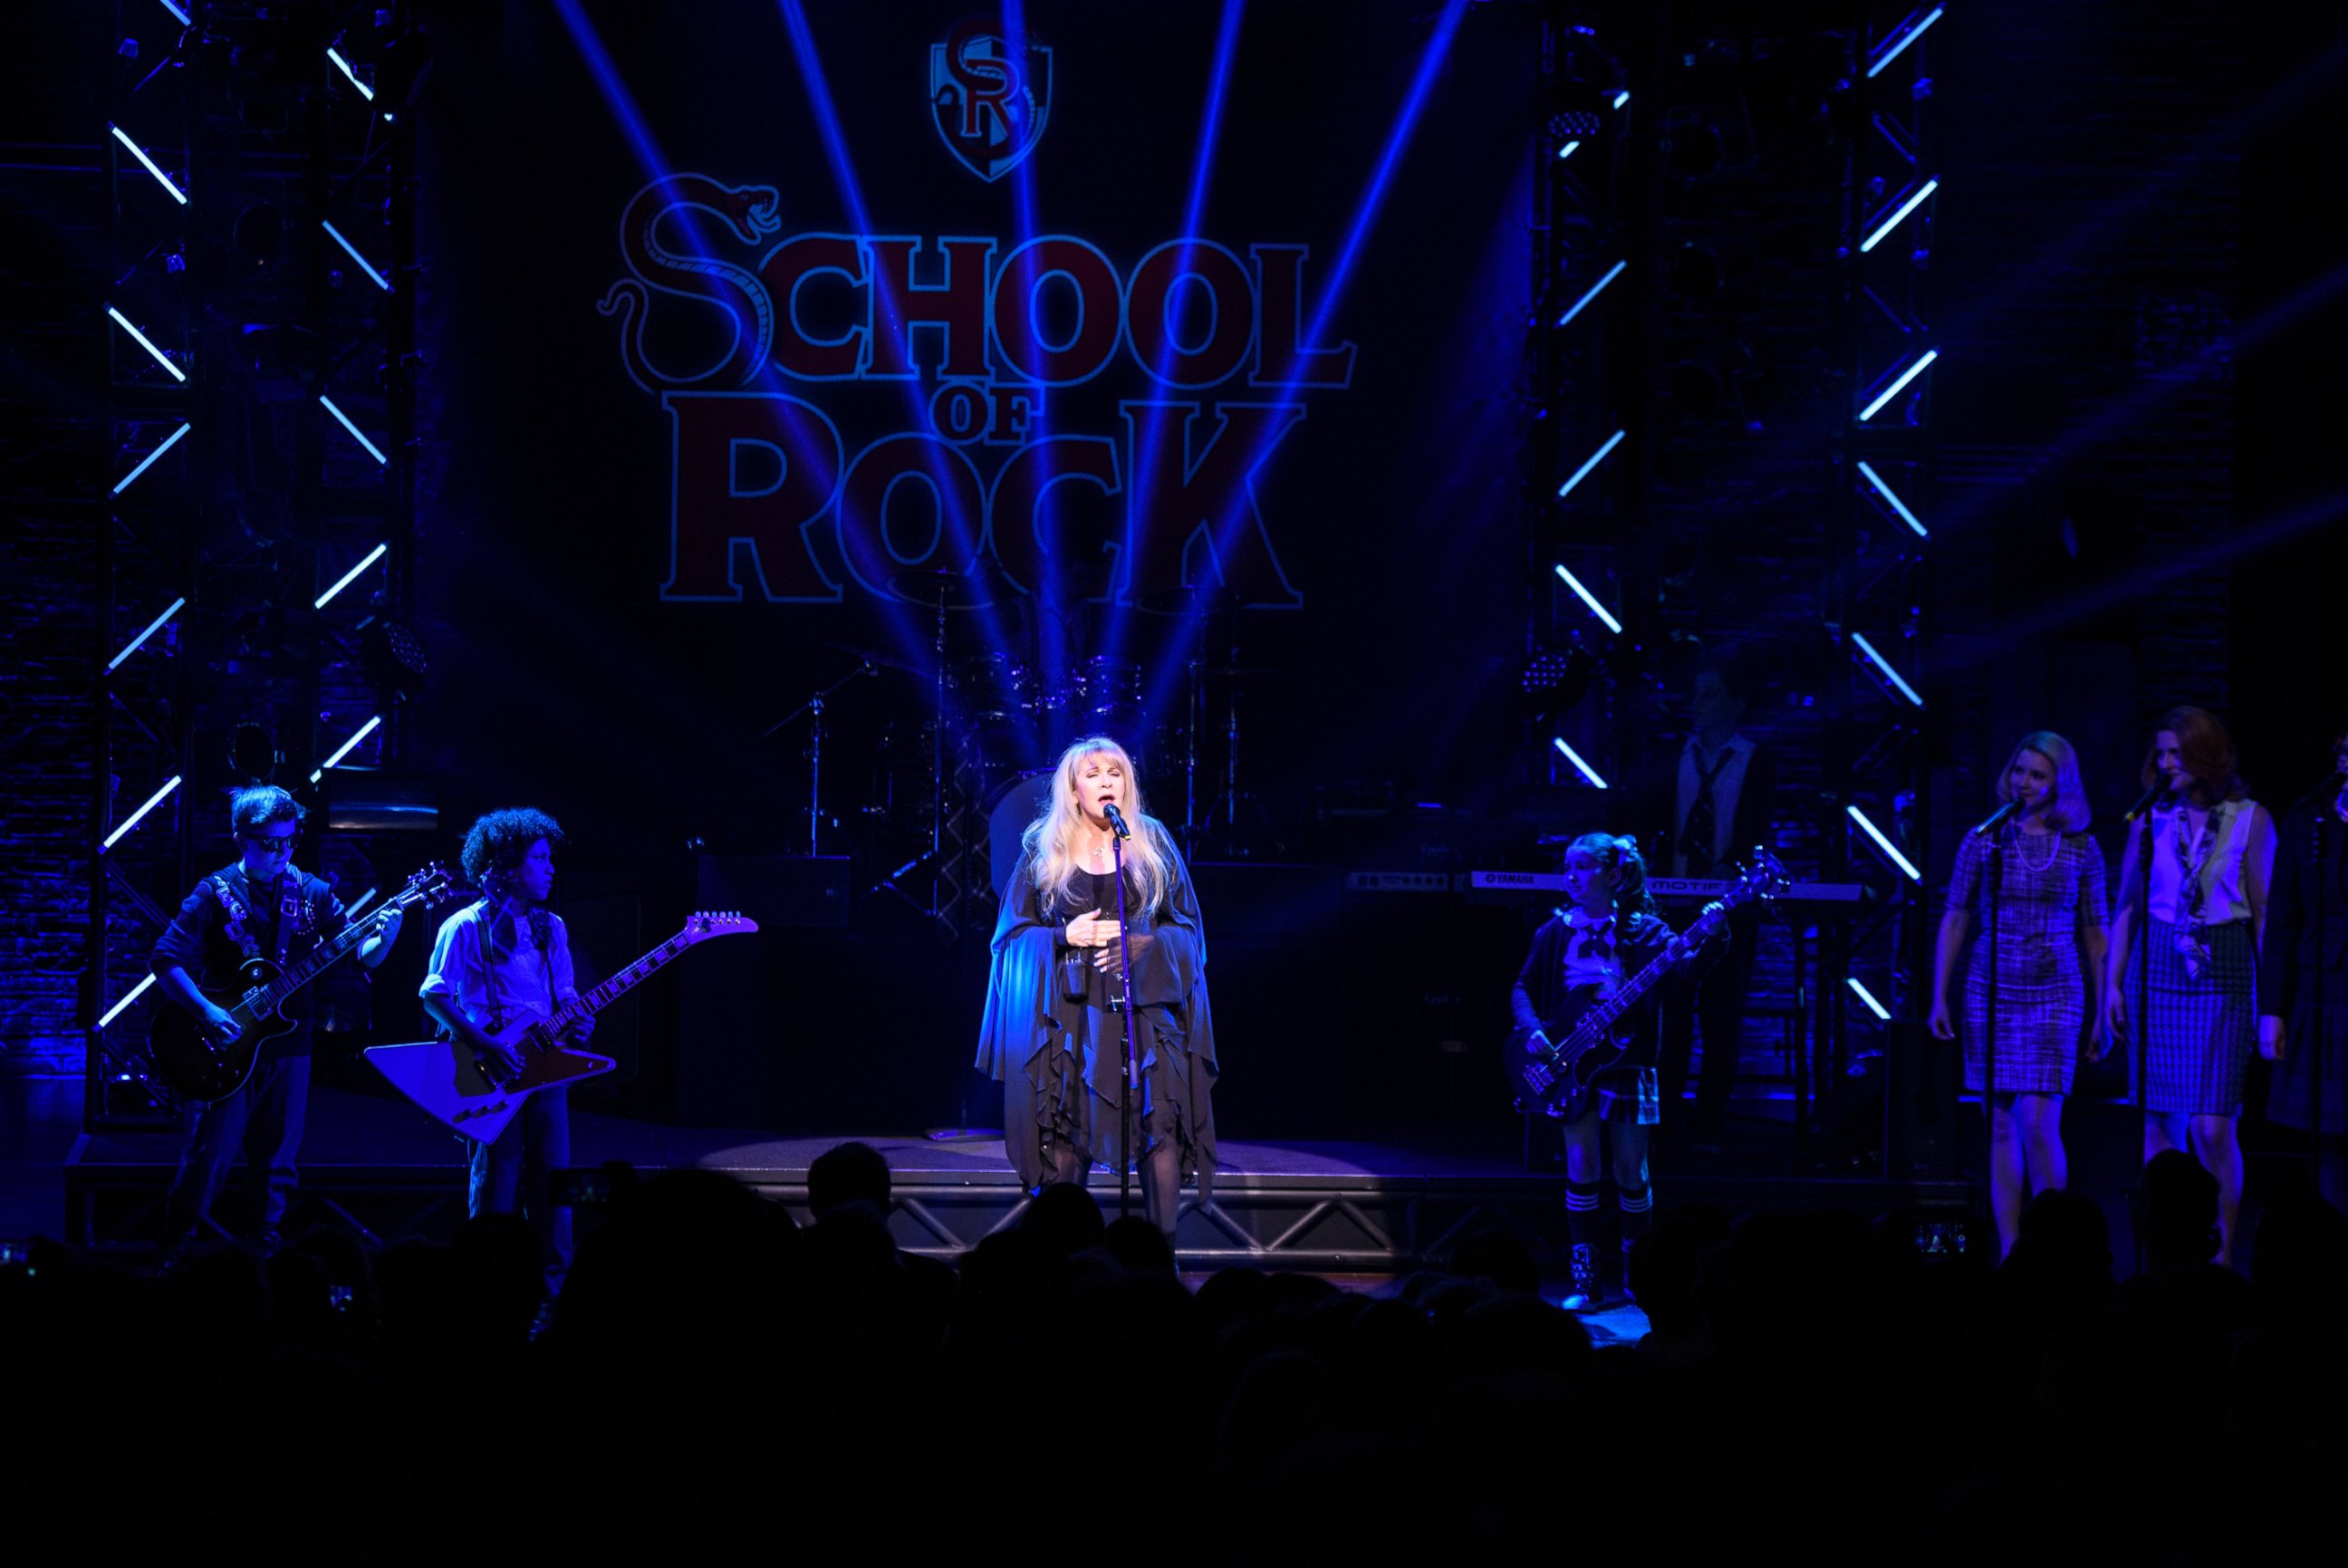 PHOTO: Stevie Nicks of the band Fleetwood Mac performs live on stage with the cast of "School of Rock - The Musical" at the Winter Garden Theatre on April 26, 2016 in New York City. 